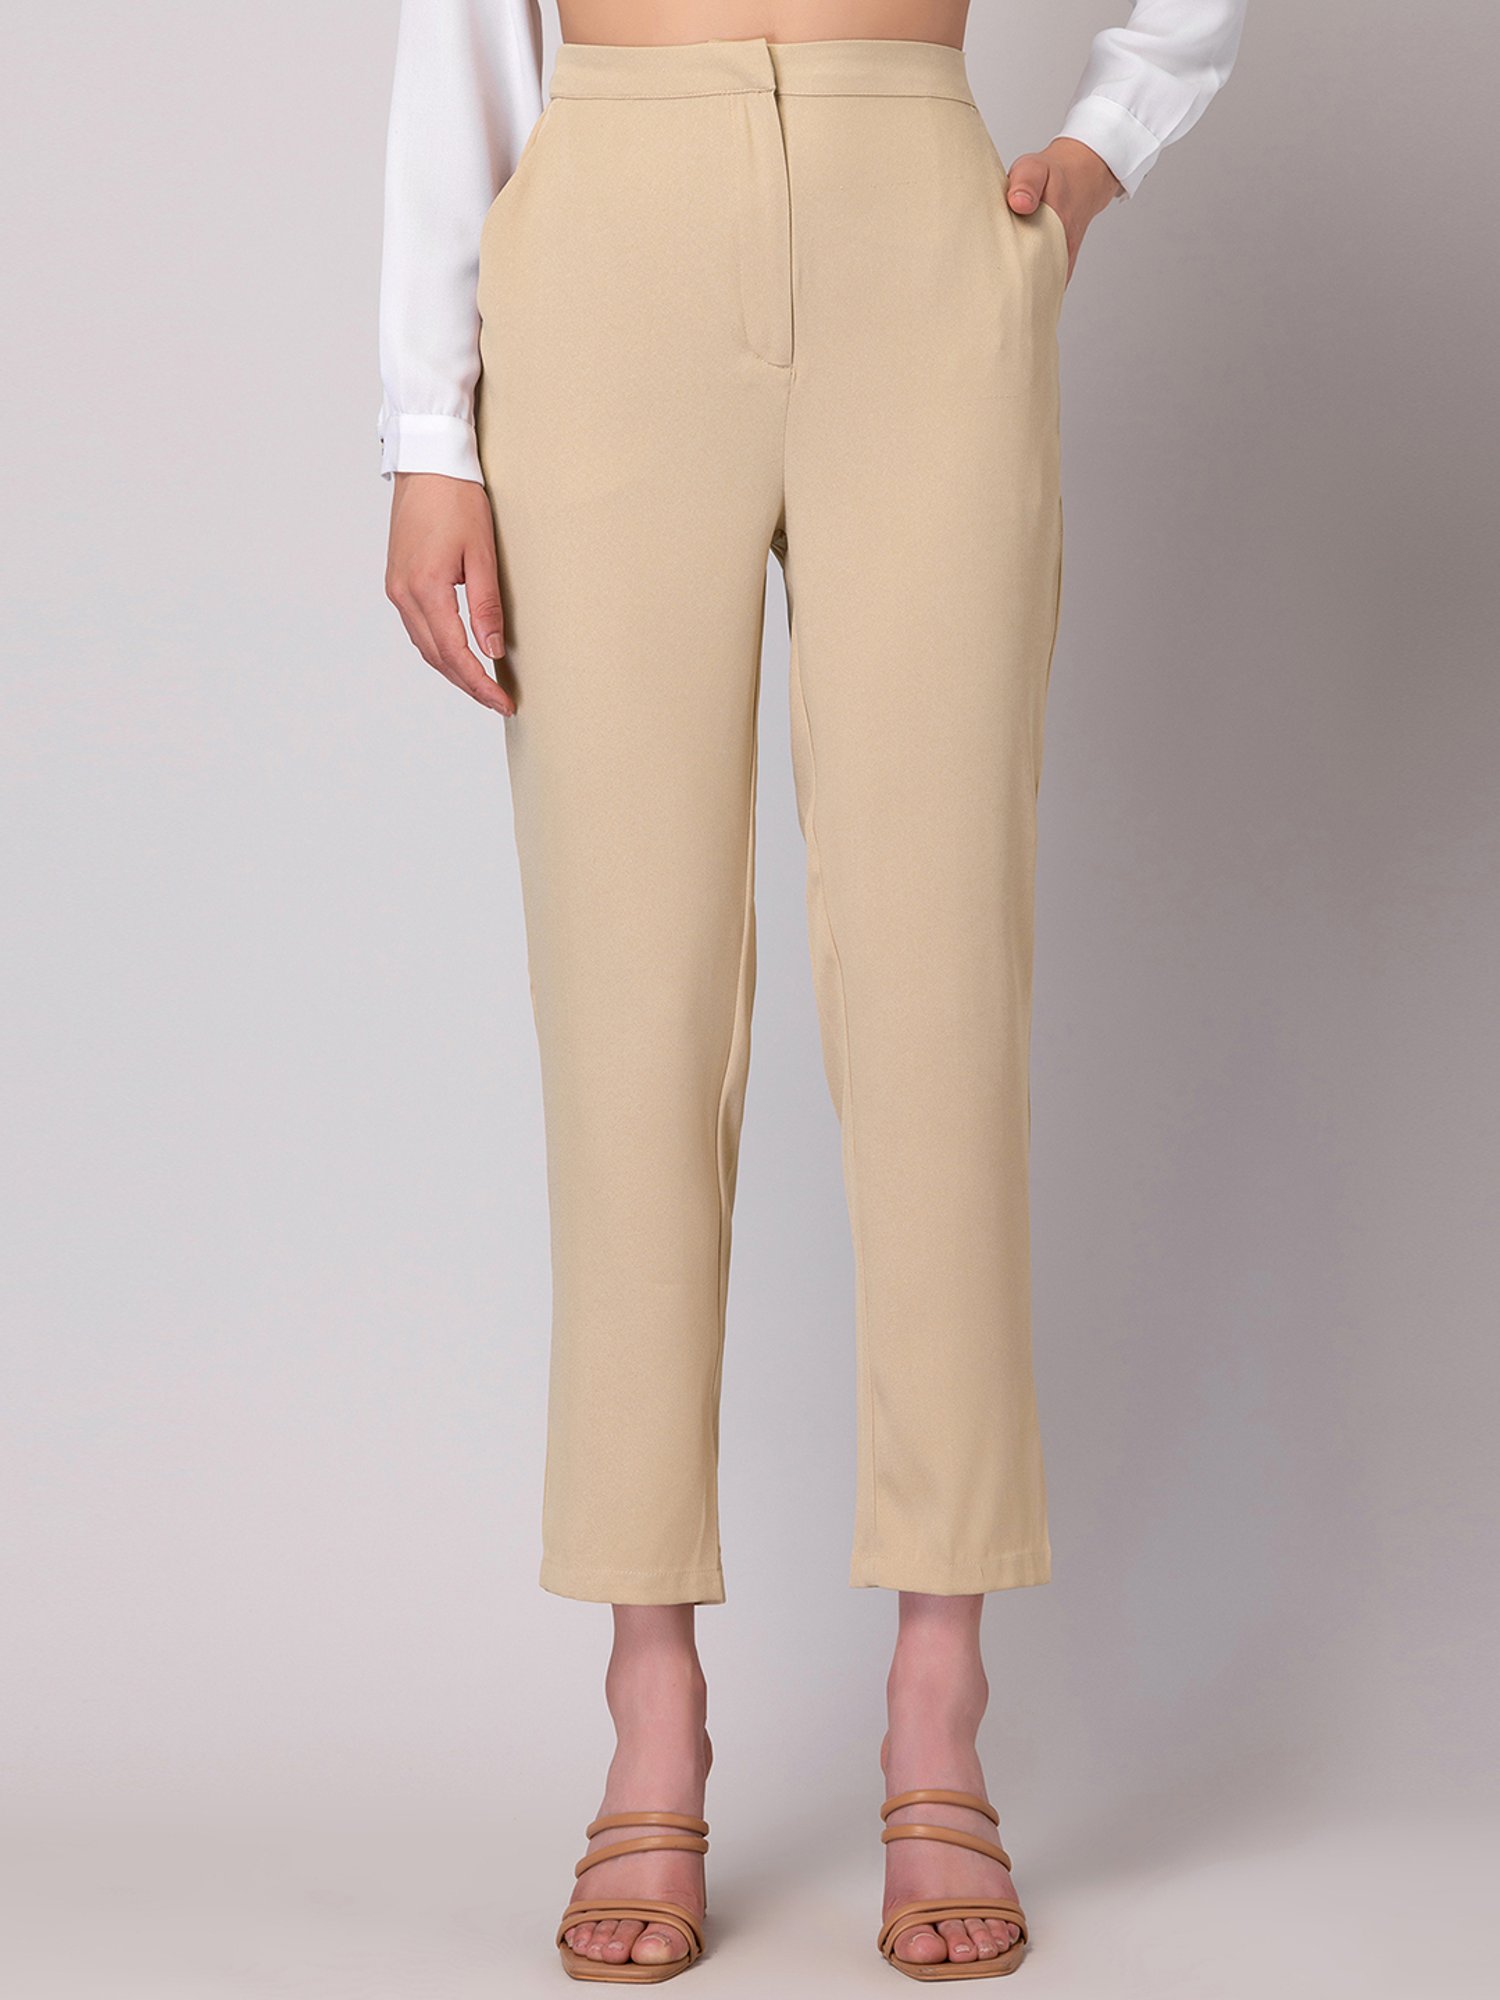 Lana - High Waisted Trousers - Sand – This is Unfolded